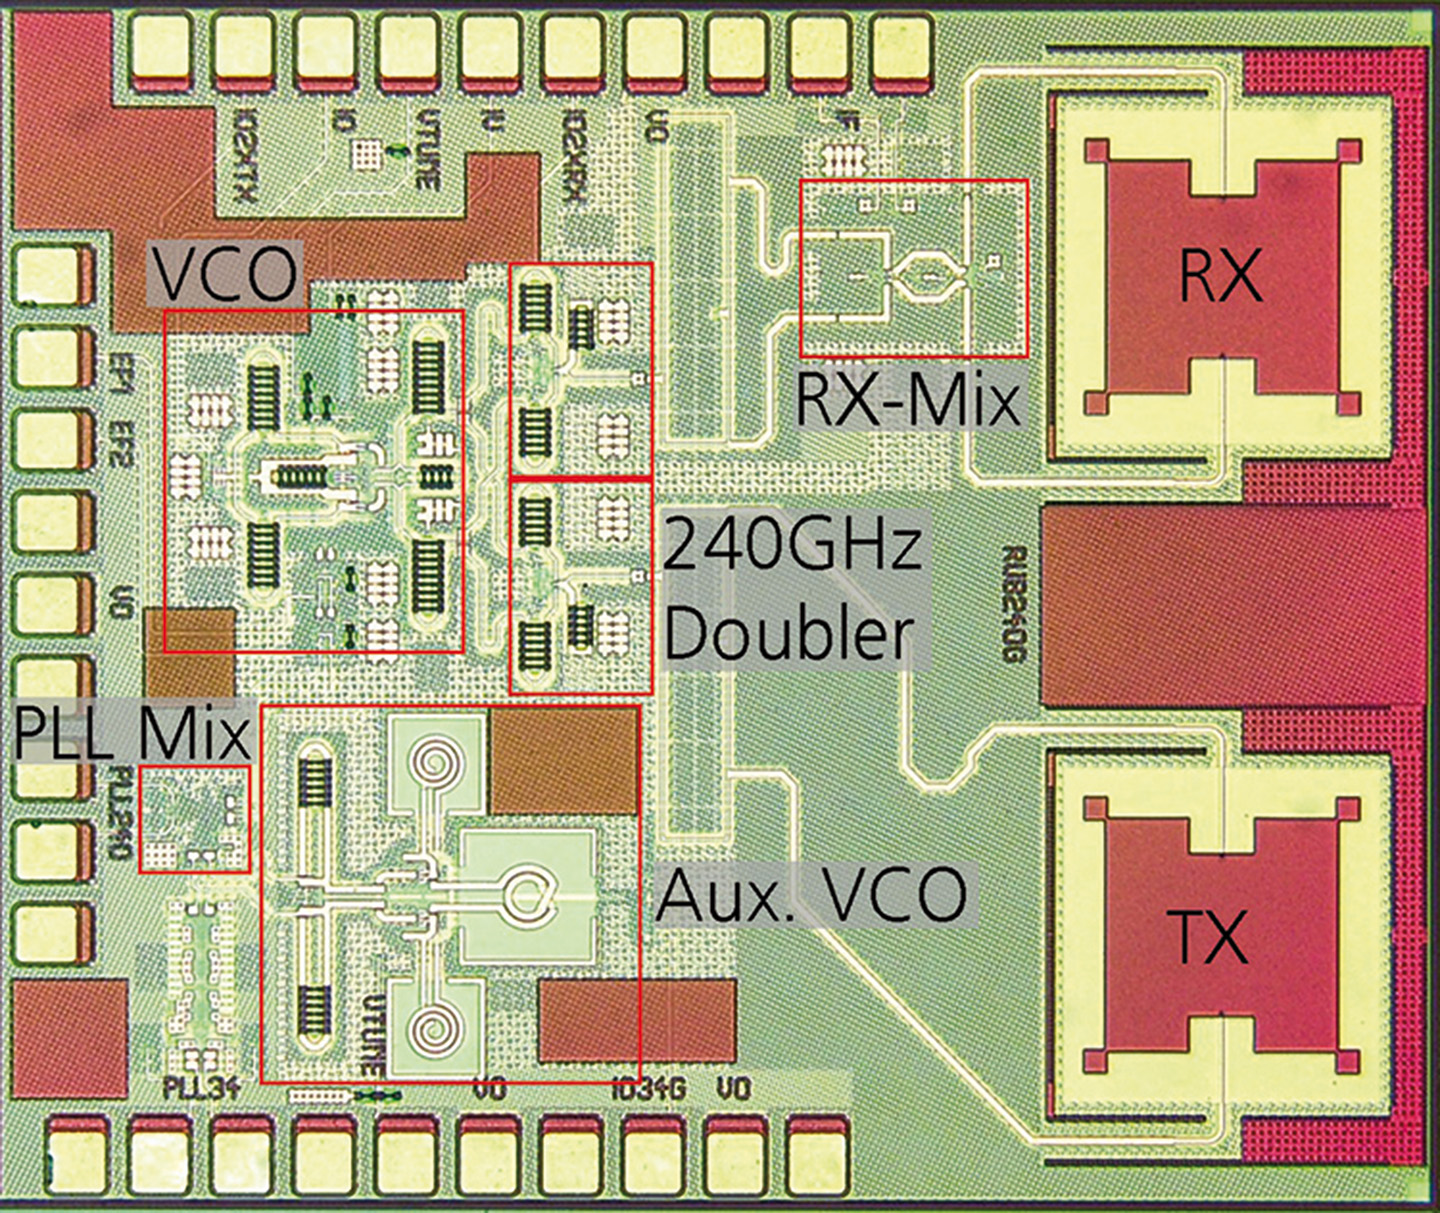 Photo of the radar chip. The FMCW signal generation is realized with a PLL-stabilized oscillator at 120 GHz with downstream frequency doublers. The two on-chip antennas can be seen on the right side of the chip.